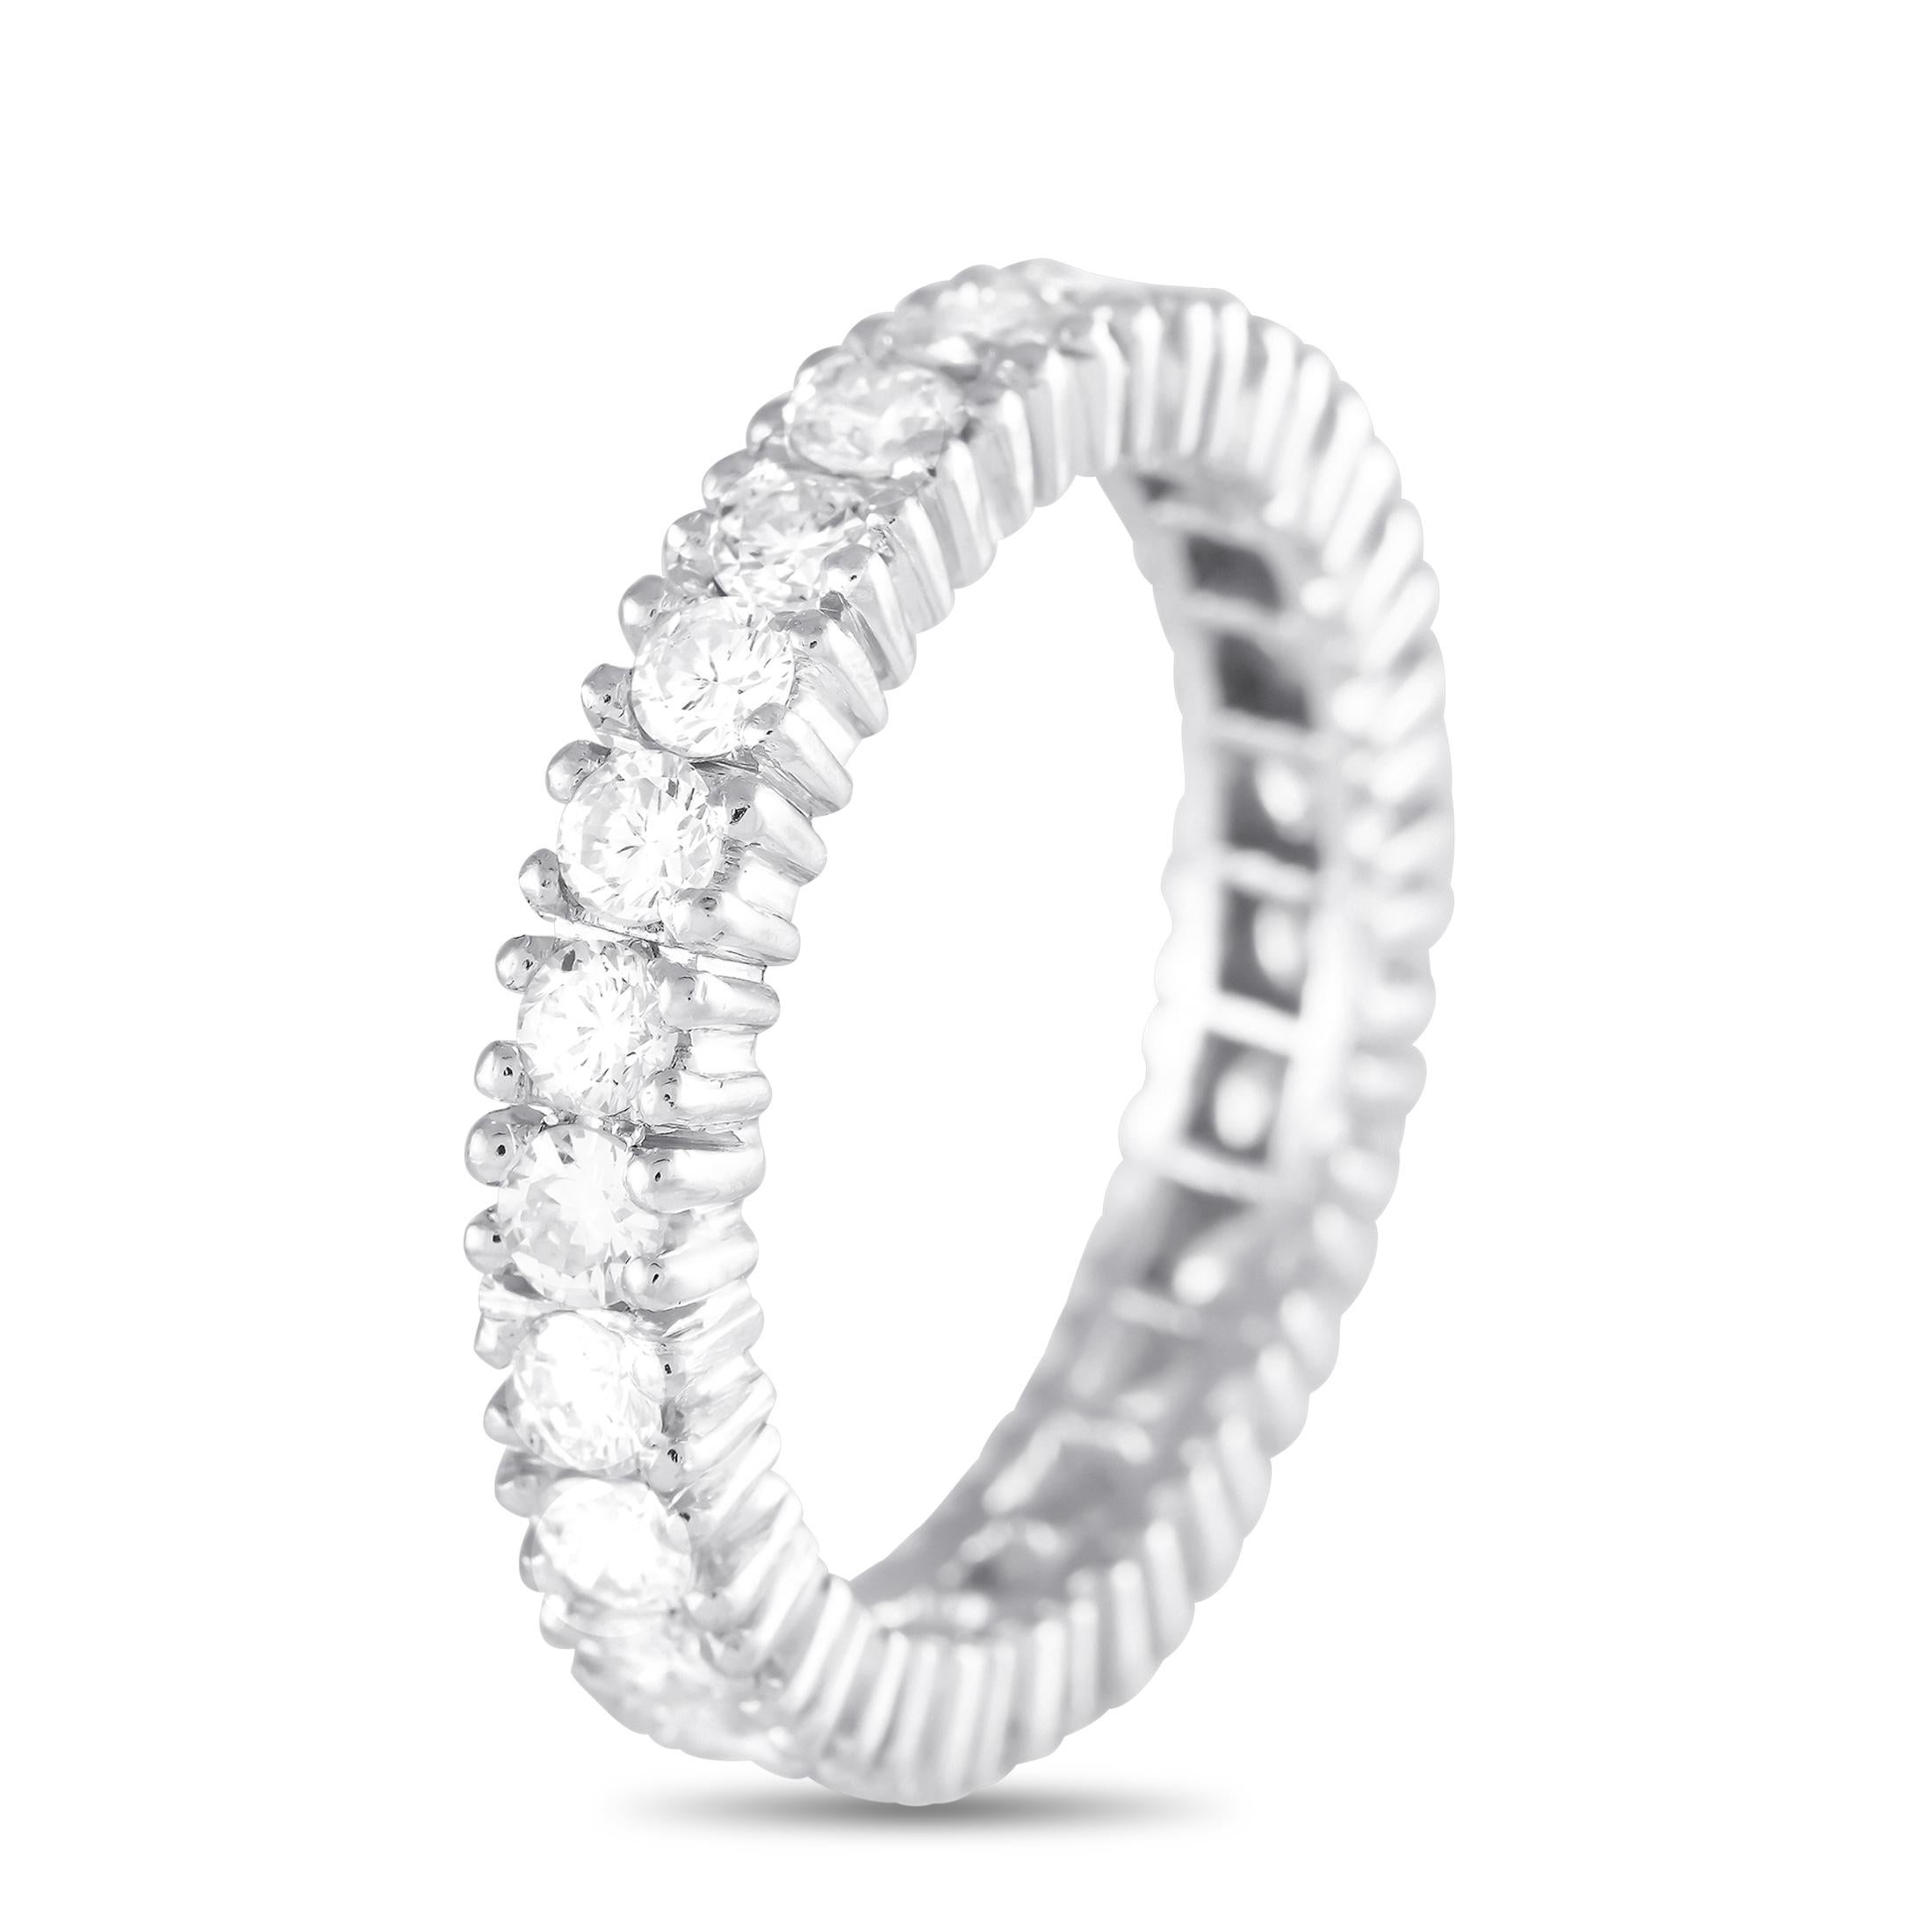 Perfect as an anniversary band or as a wedding band, this eternity ring delivers non-stop sparkle symbolizing everlasting love. It features round brilliant diamonds totaling 1.25 carats lined along the white gold band's entire circumference. The